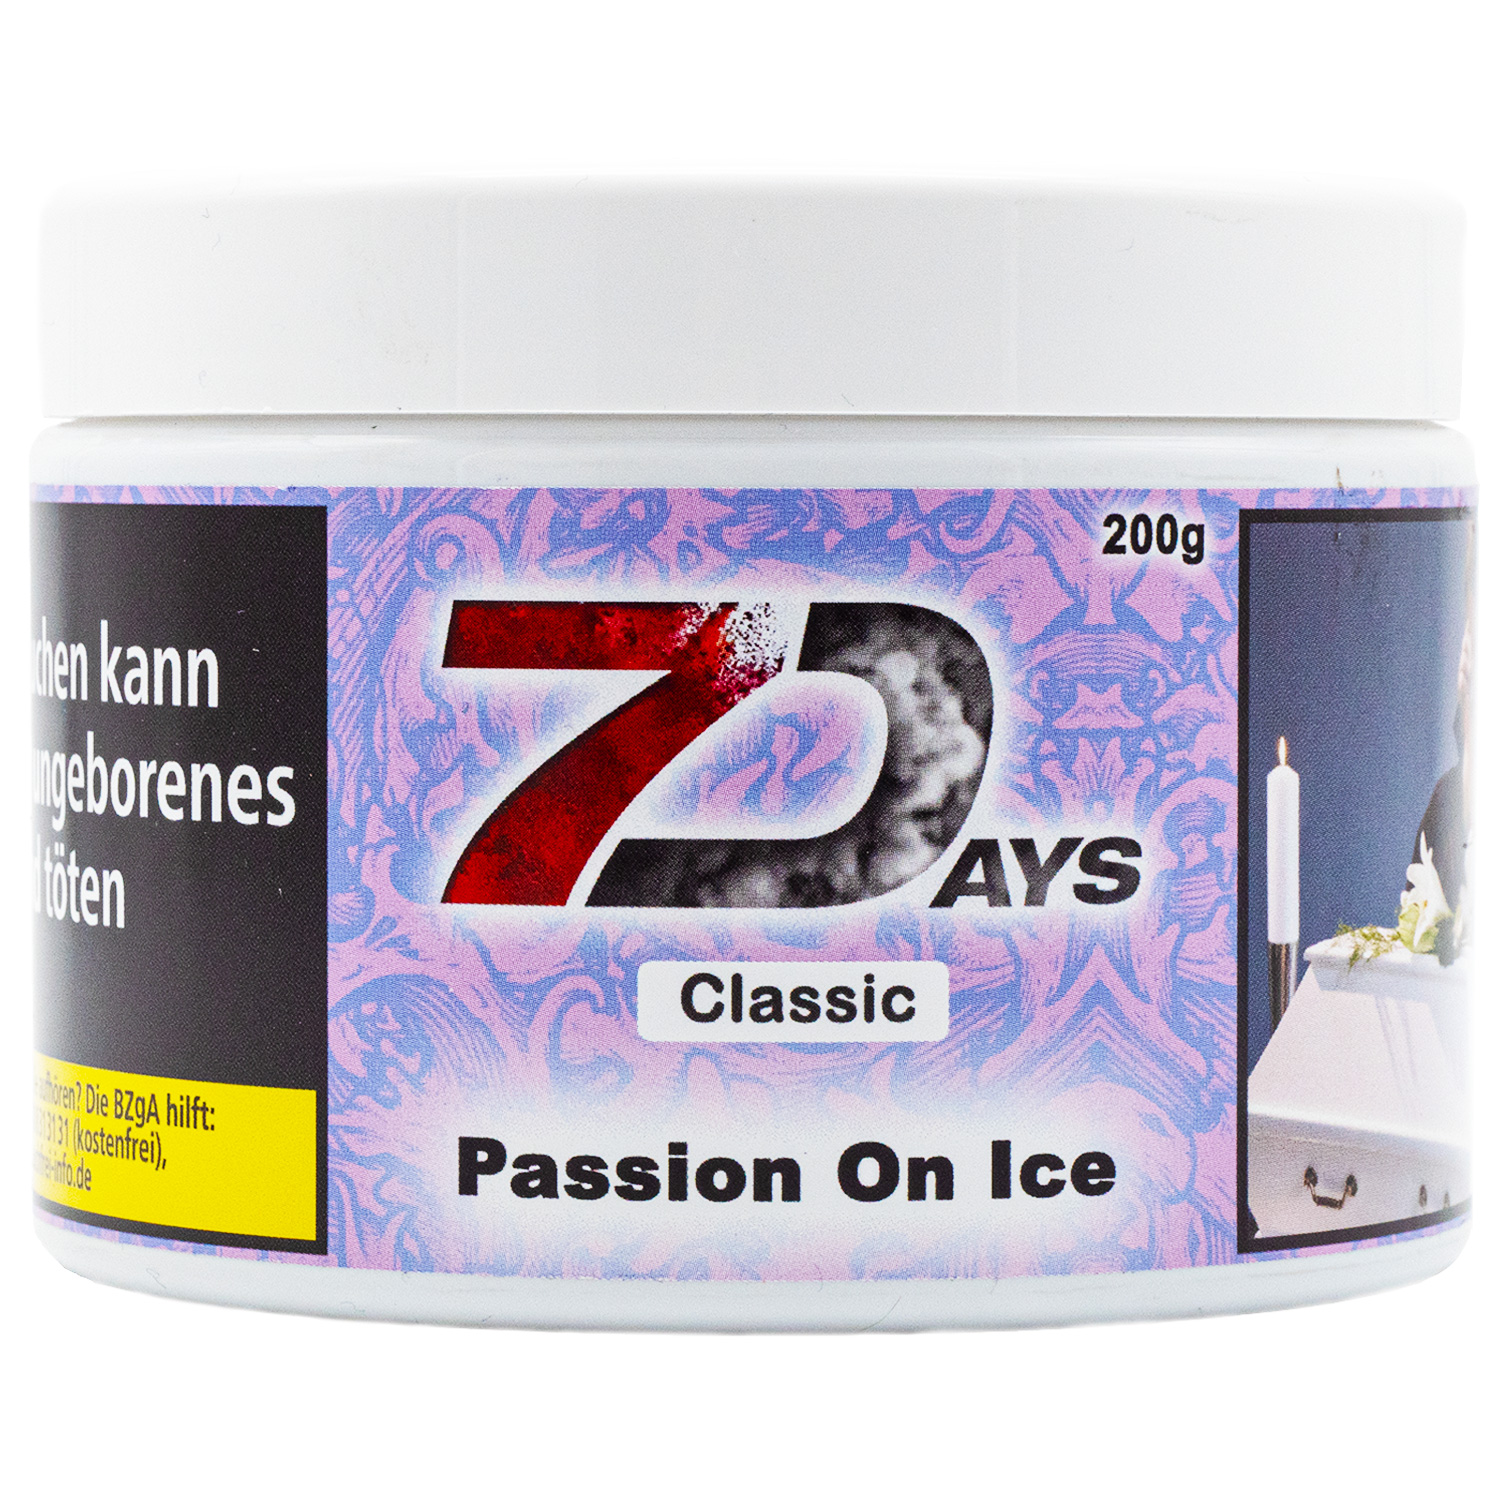 7 Days Classic | Passion on Ice | 200g